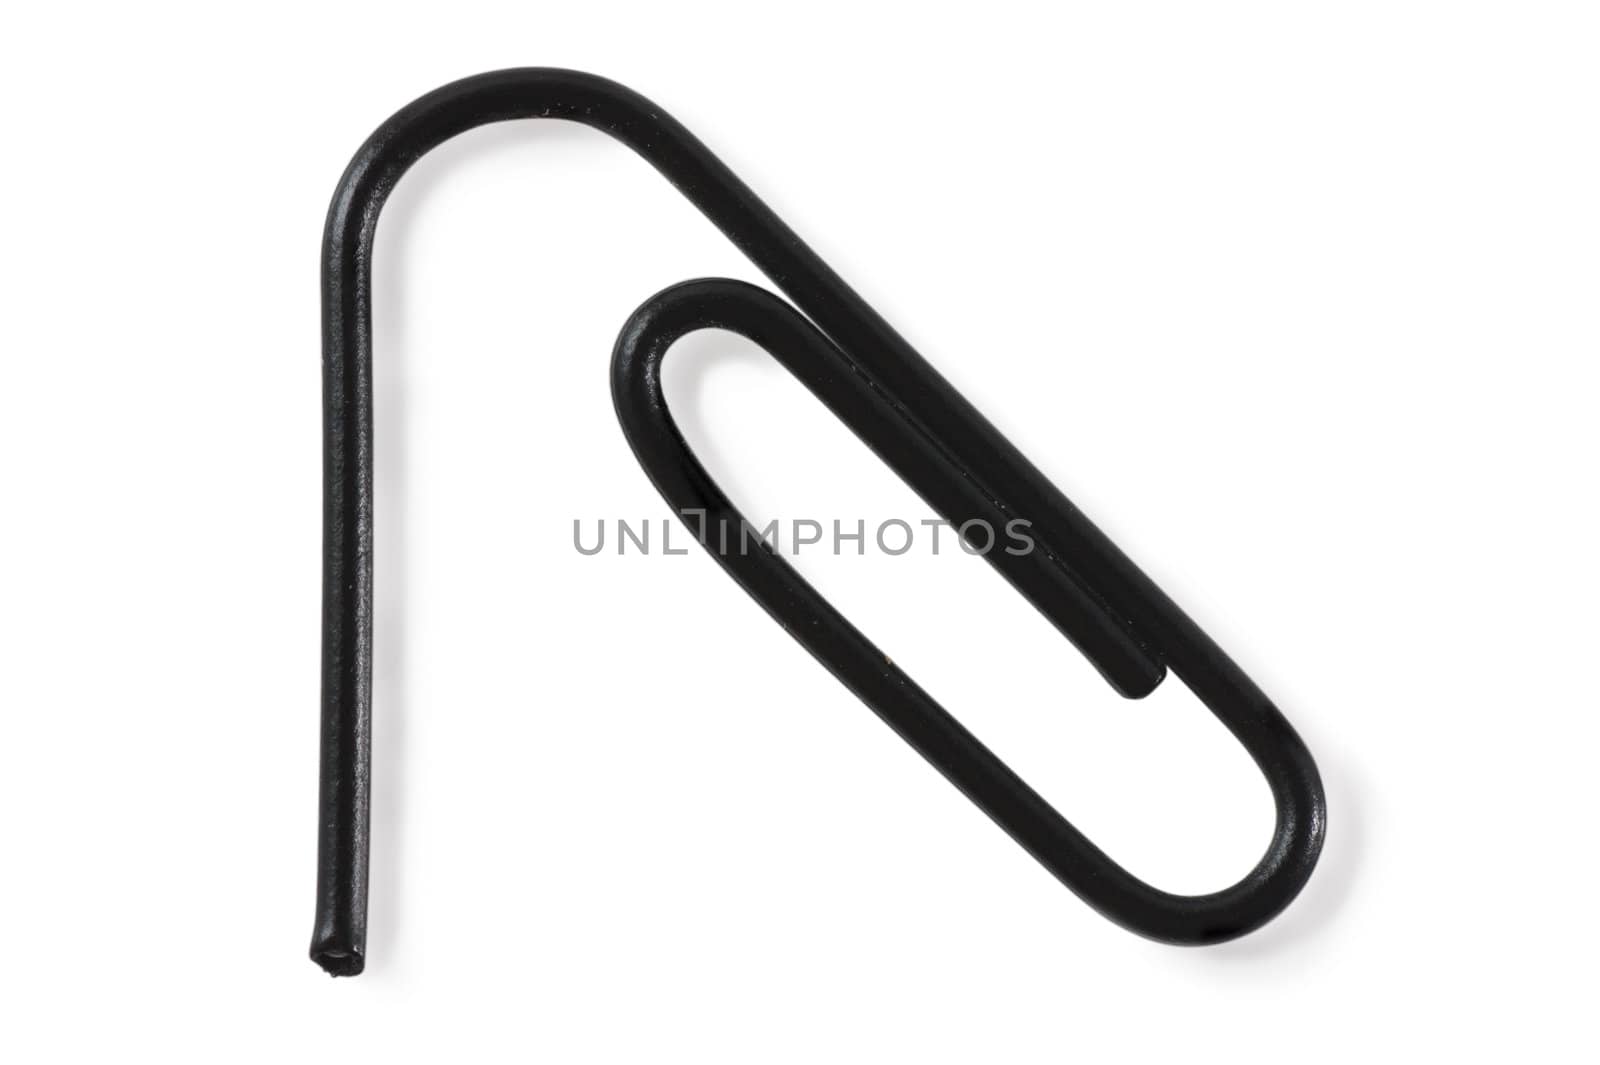 Macro view of black paper clip isolated over white